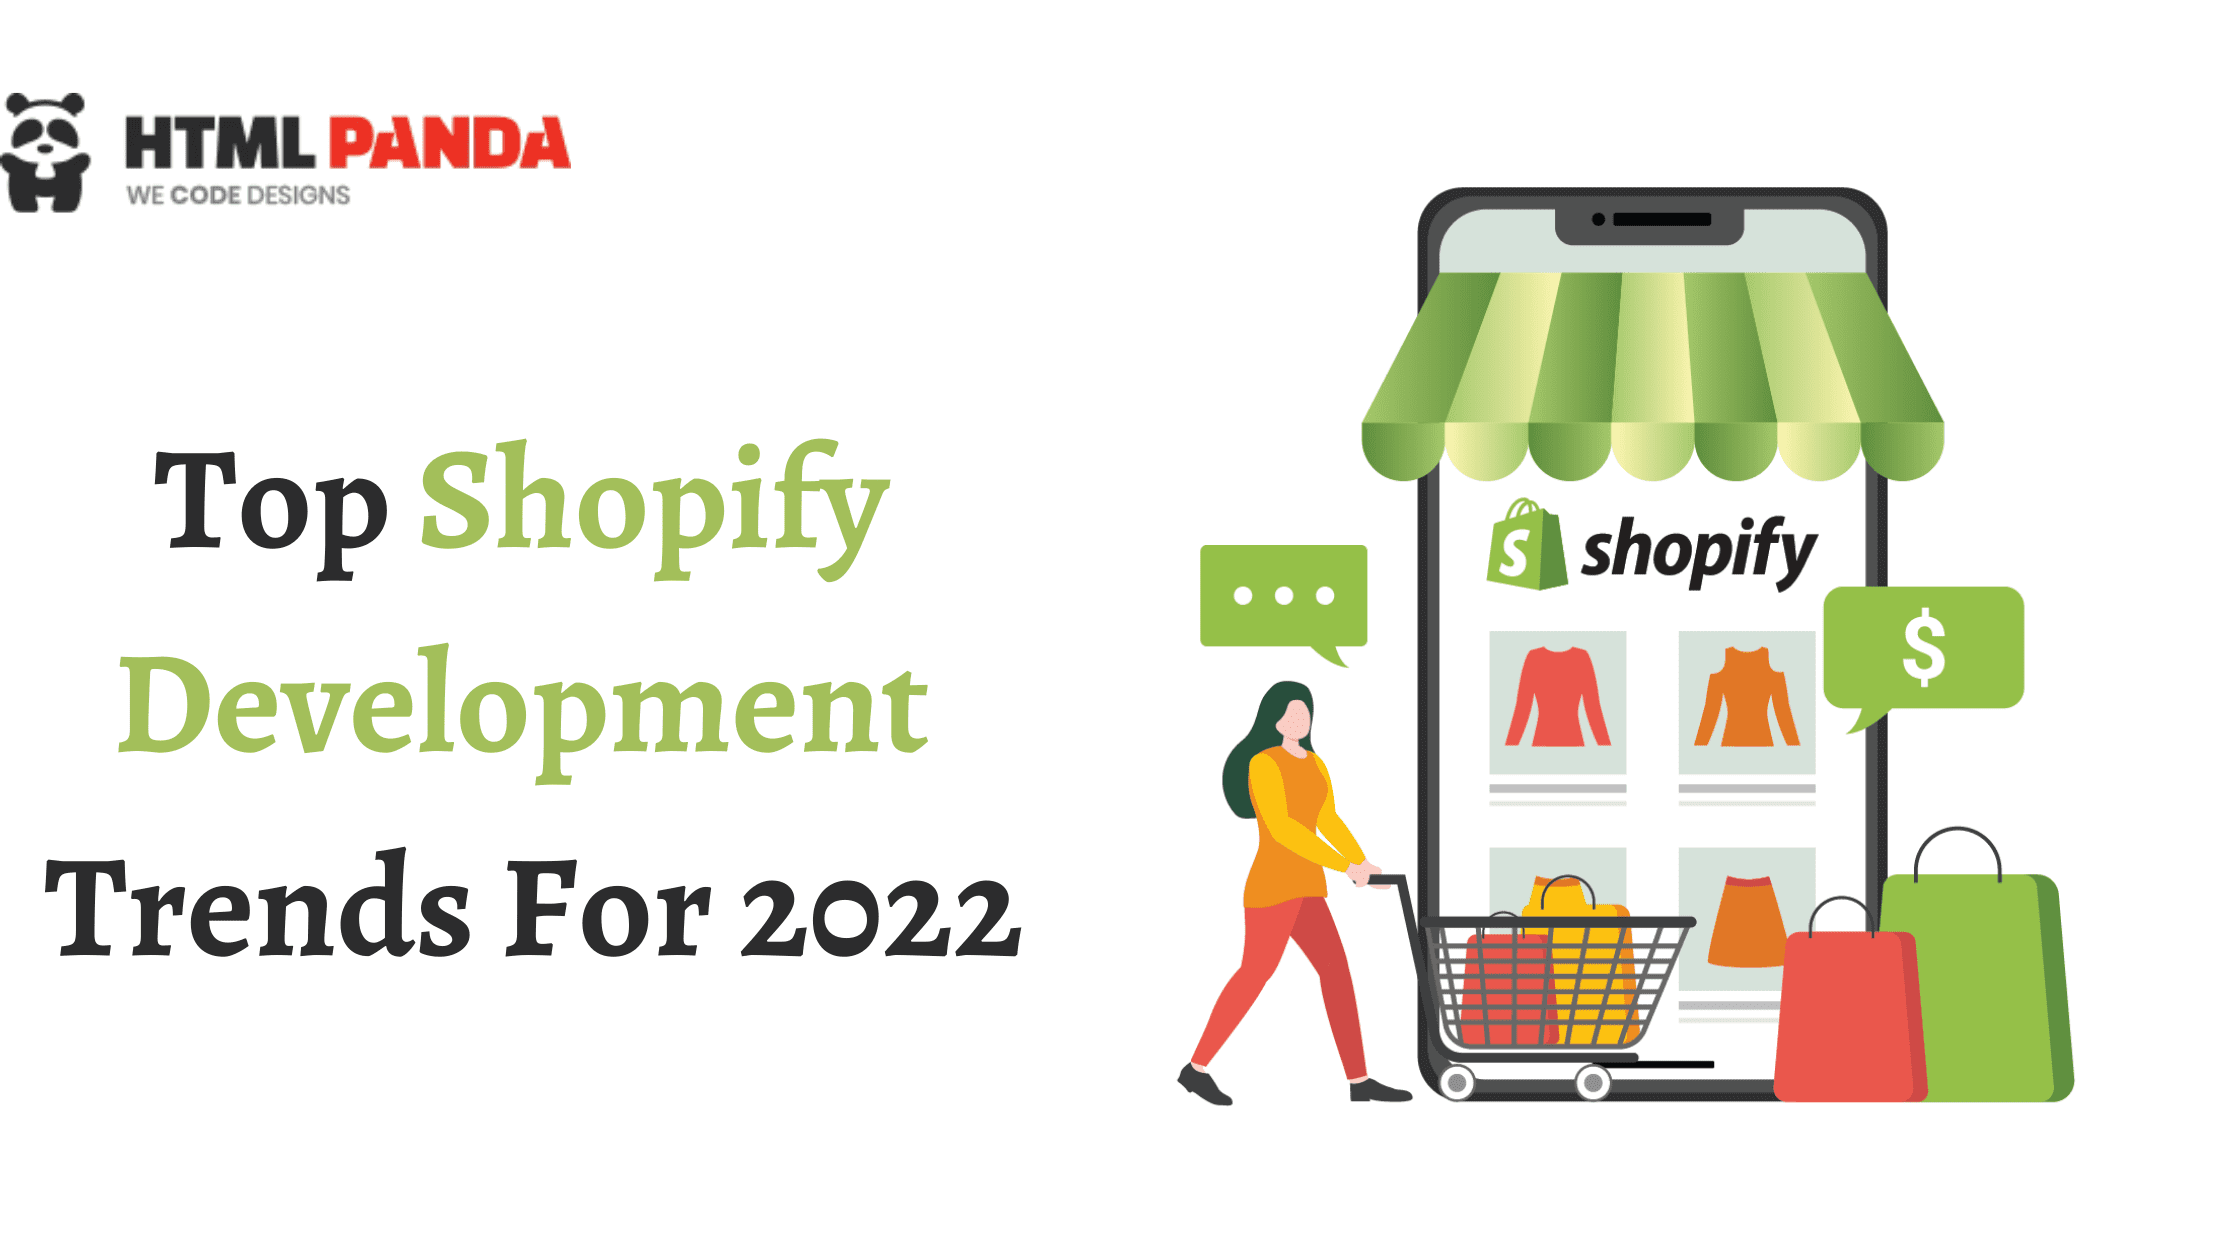 Top Shopify Development Trends For